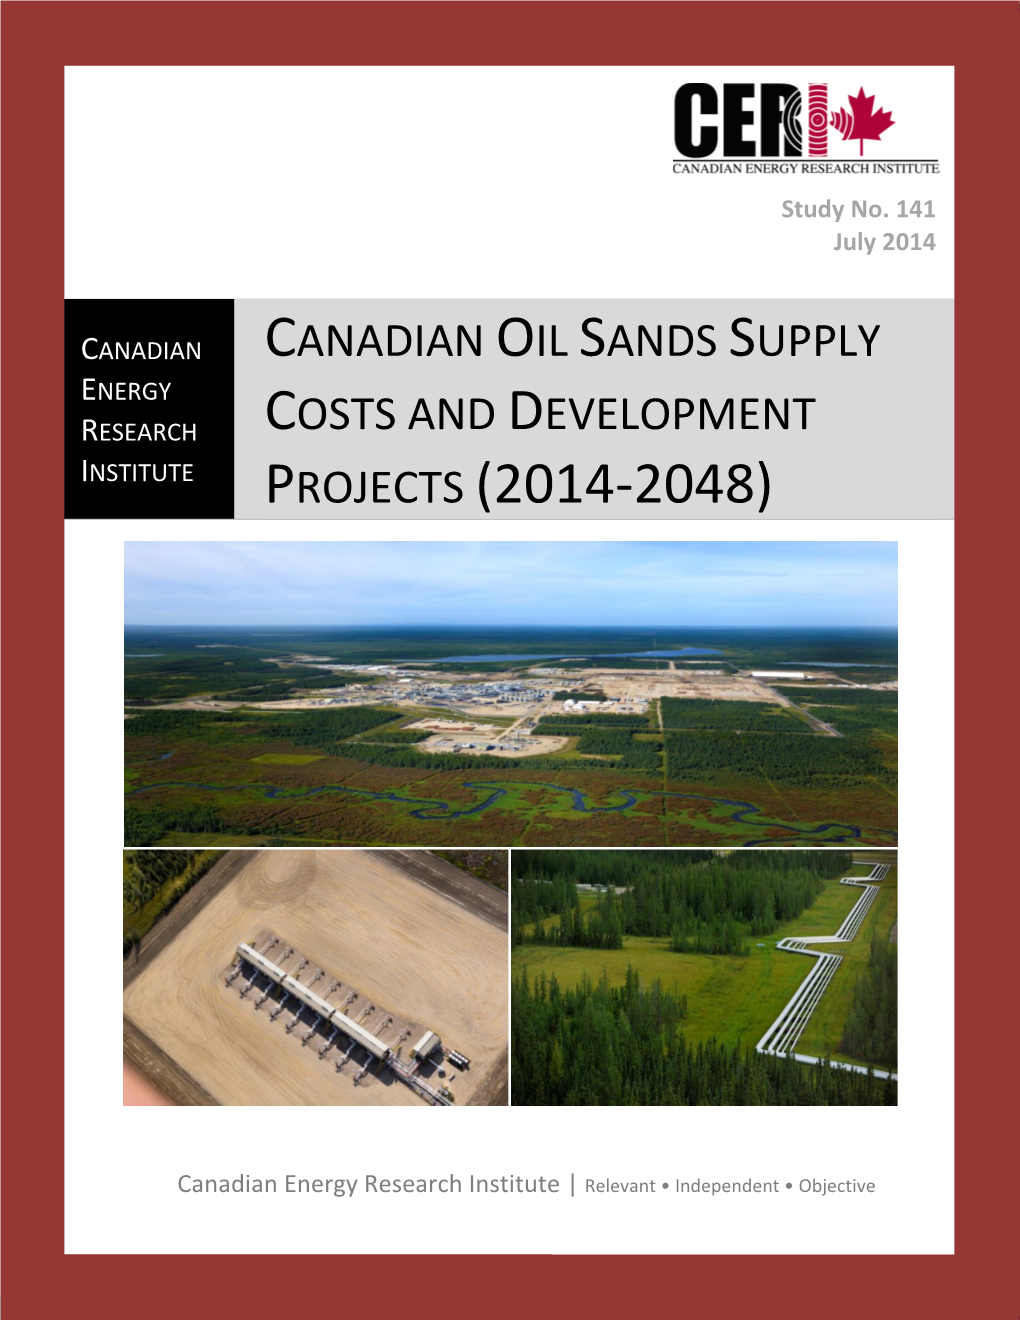 Canadian Oil Sands Supply Costs and Development Projects (2014-2048)